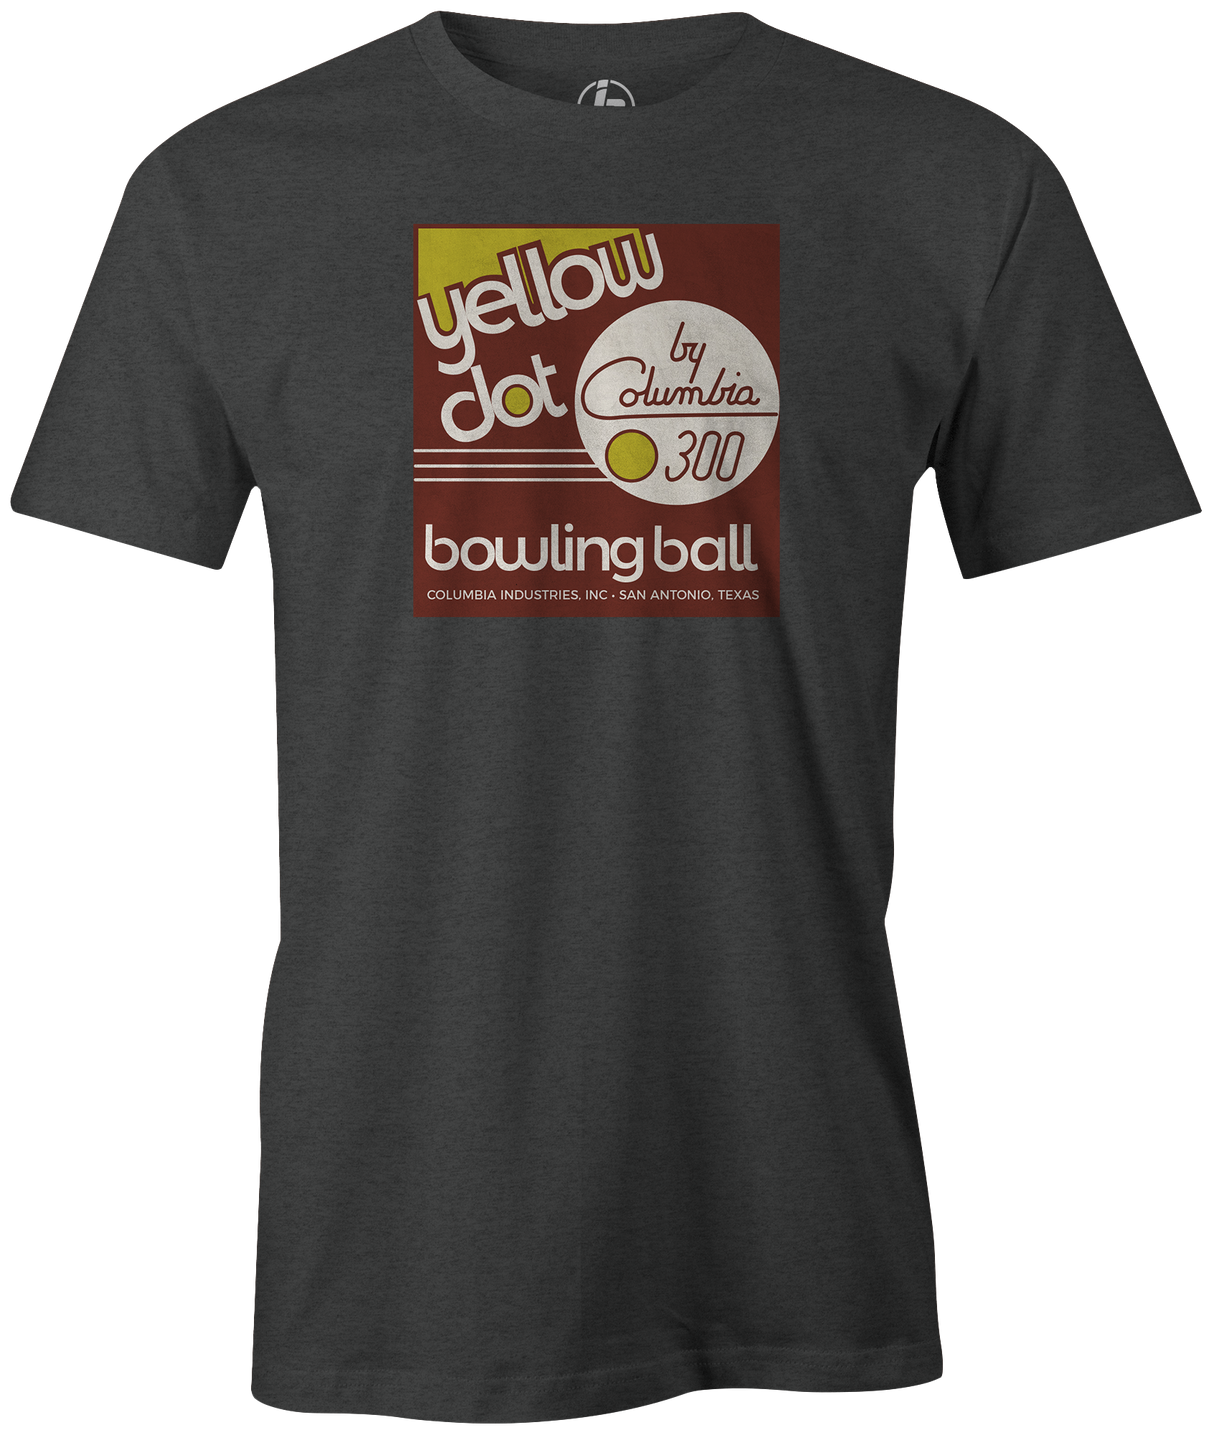 Take home a piece of history with this classic Yellow Dot Retro Style T-shirt! Hit the lanes in this awesome shirt and knock down some pins! This is the perfect gift for any long time bowler or fan of Columbia 300! Tshirt, tee, tee-shirt, tee shirt, Pro shop. League bowling team shirt. PBA. PWBA. USBC. Junior Gold. Youth bowling. Tournament t-shirt. Men's. 